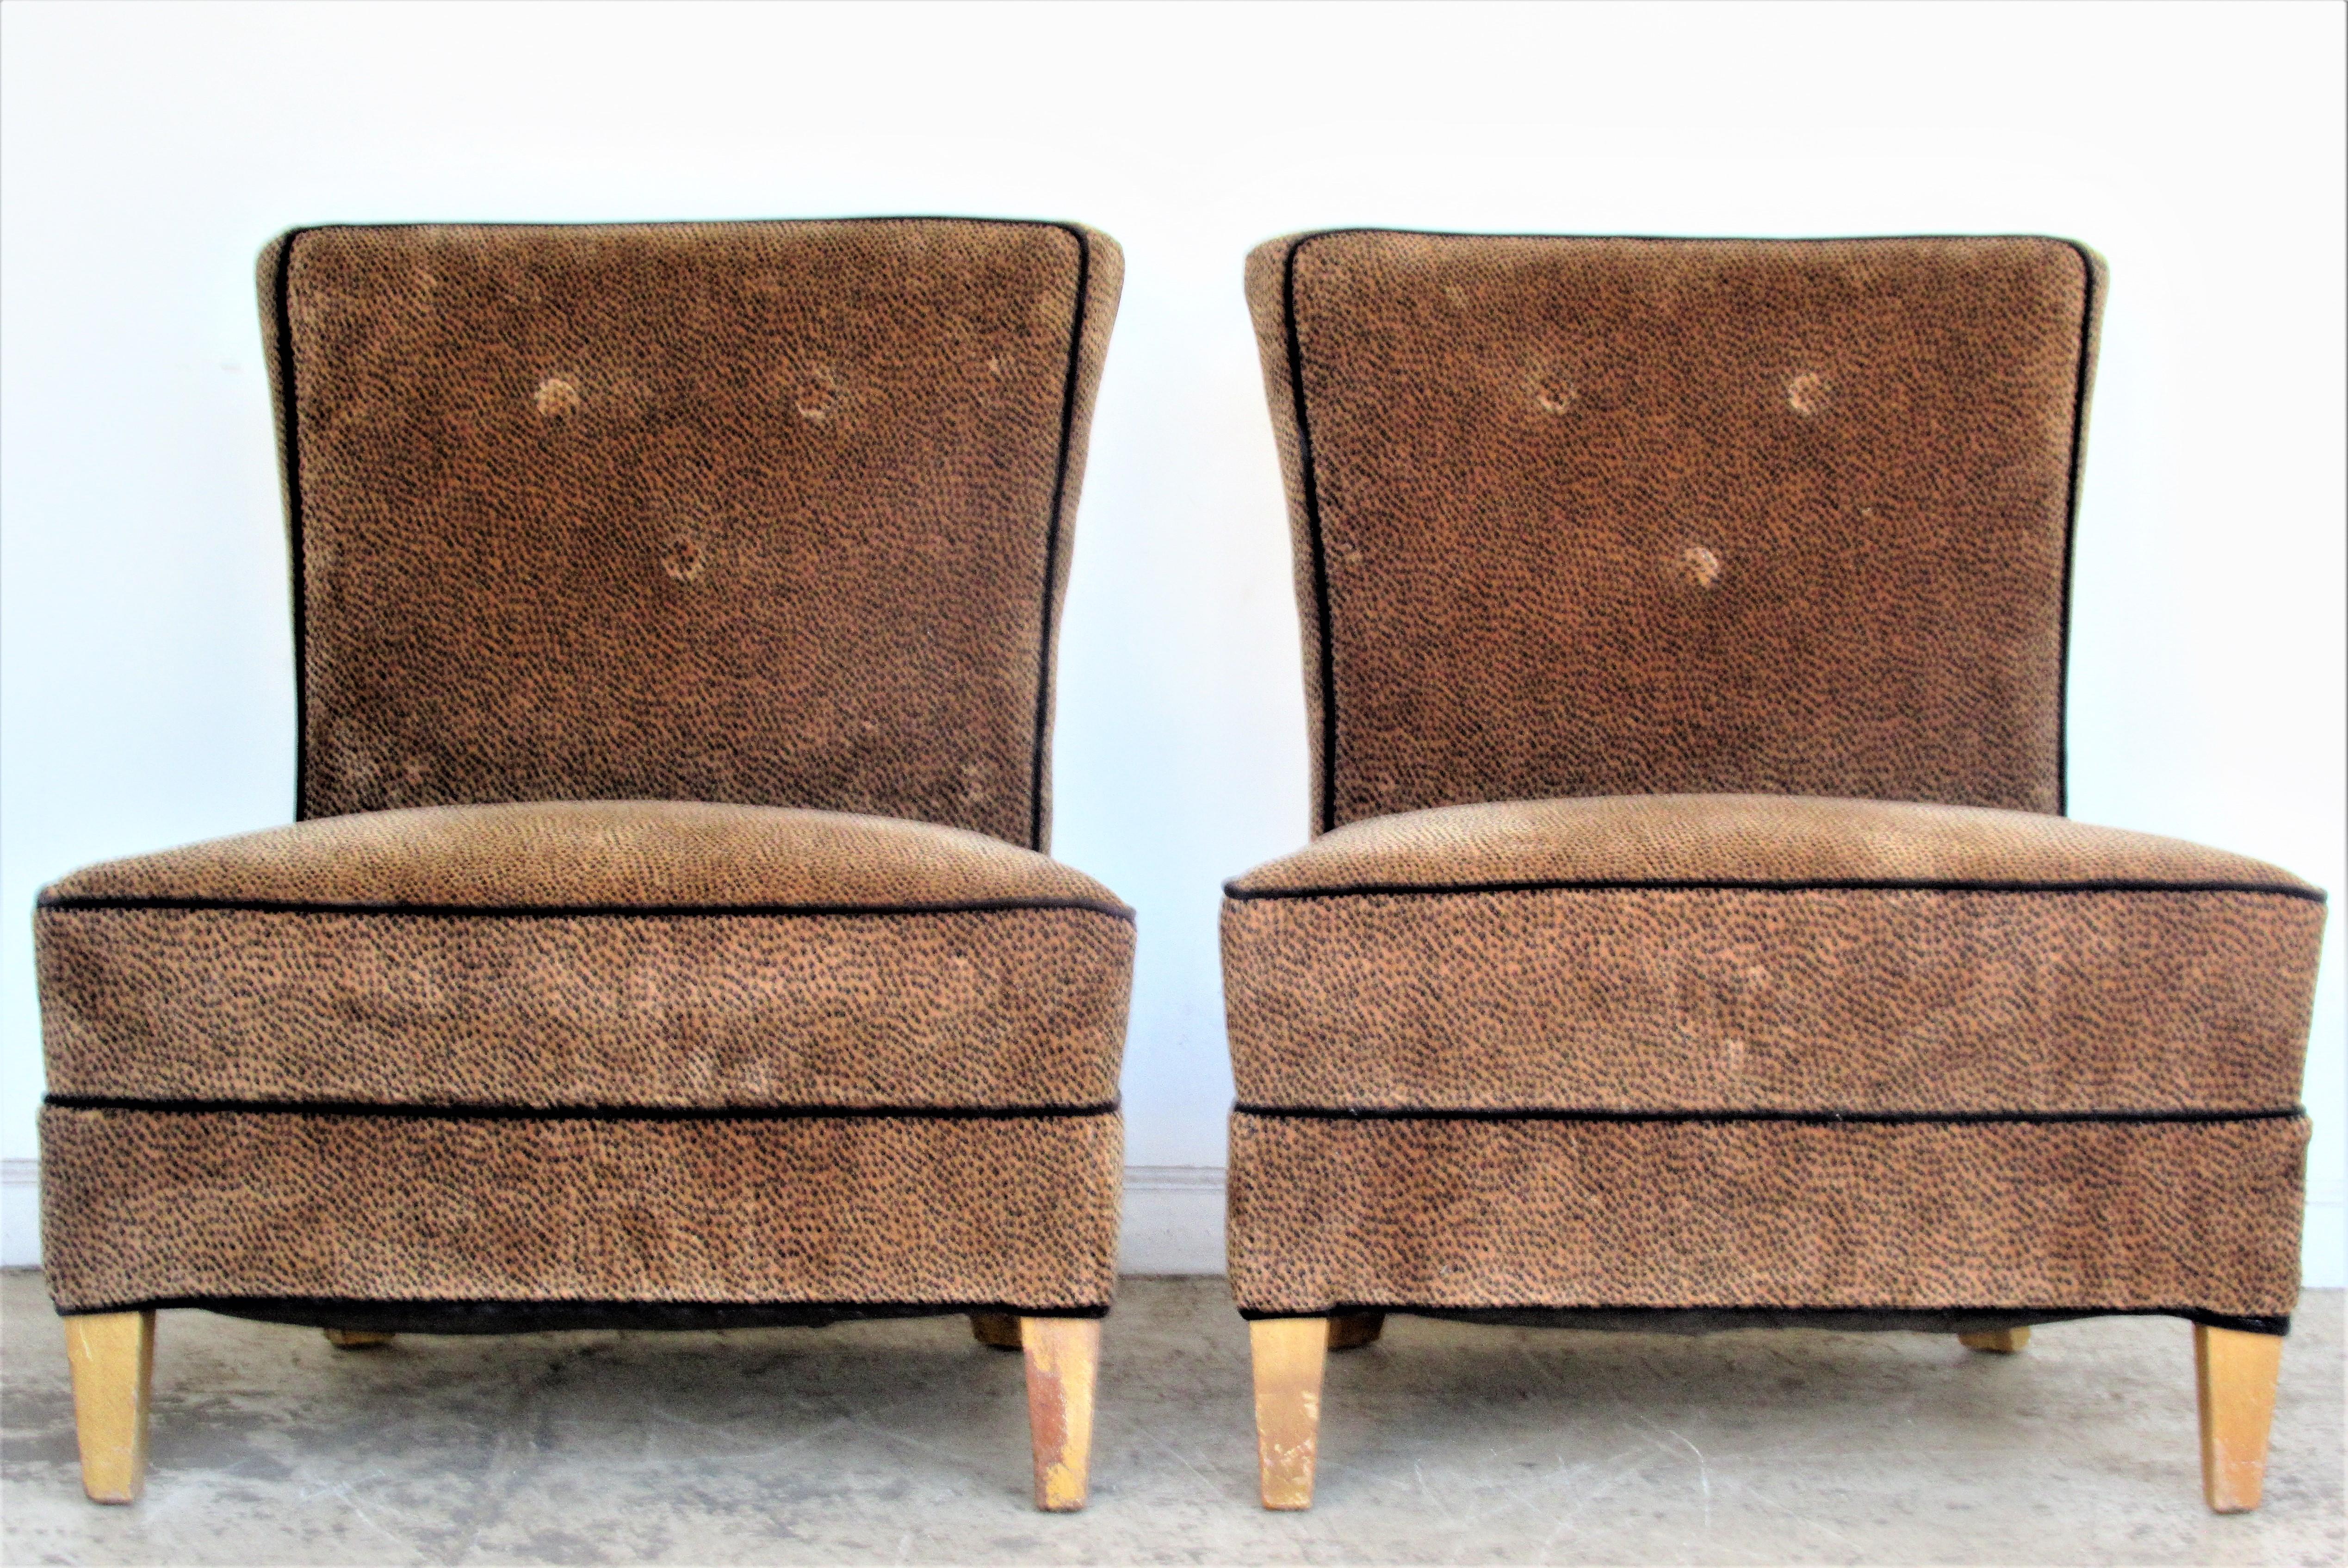 A great looking pair of Hollywood Regency broad seat slipper chairs in a luxurious contemporary button tufted cotton velvet faux leopard Kravet upholstery, circa 1960.